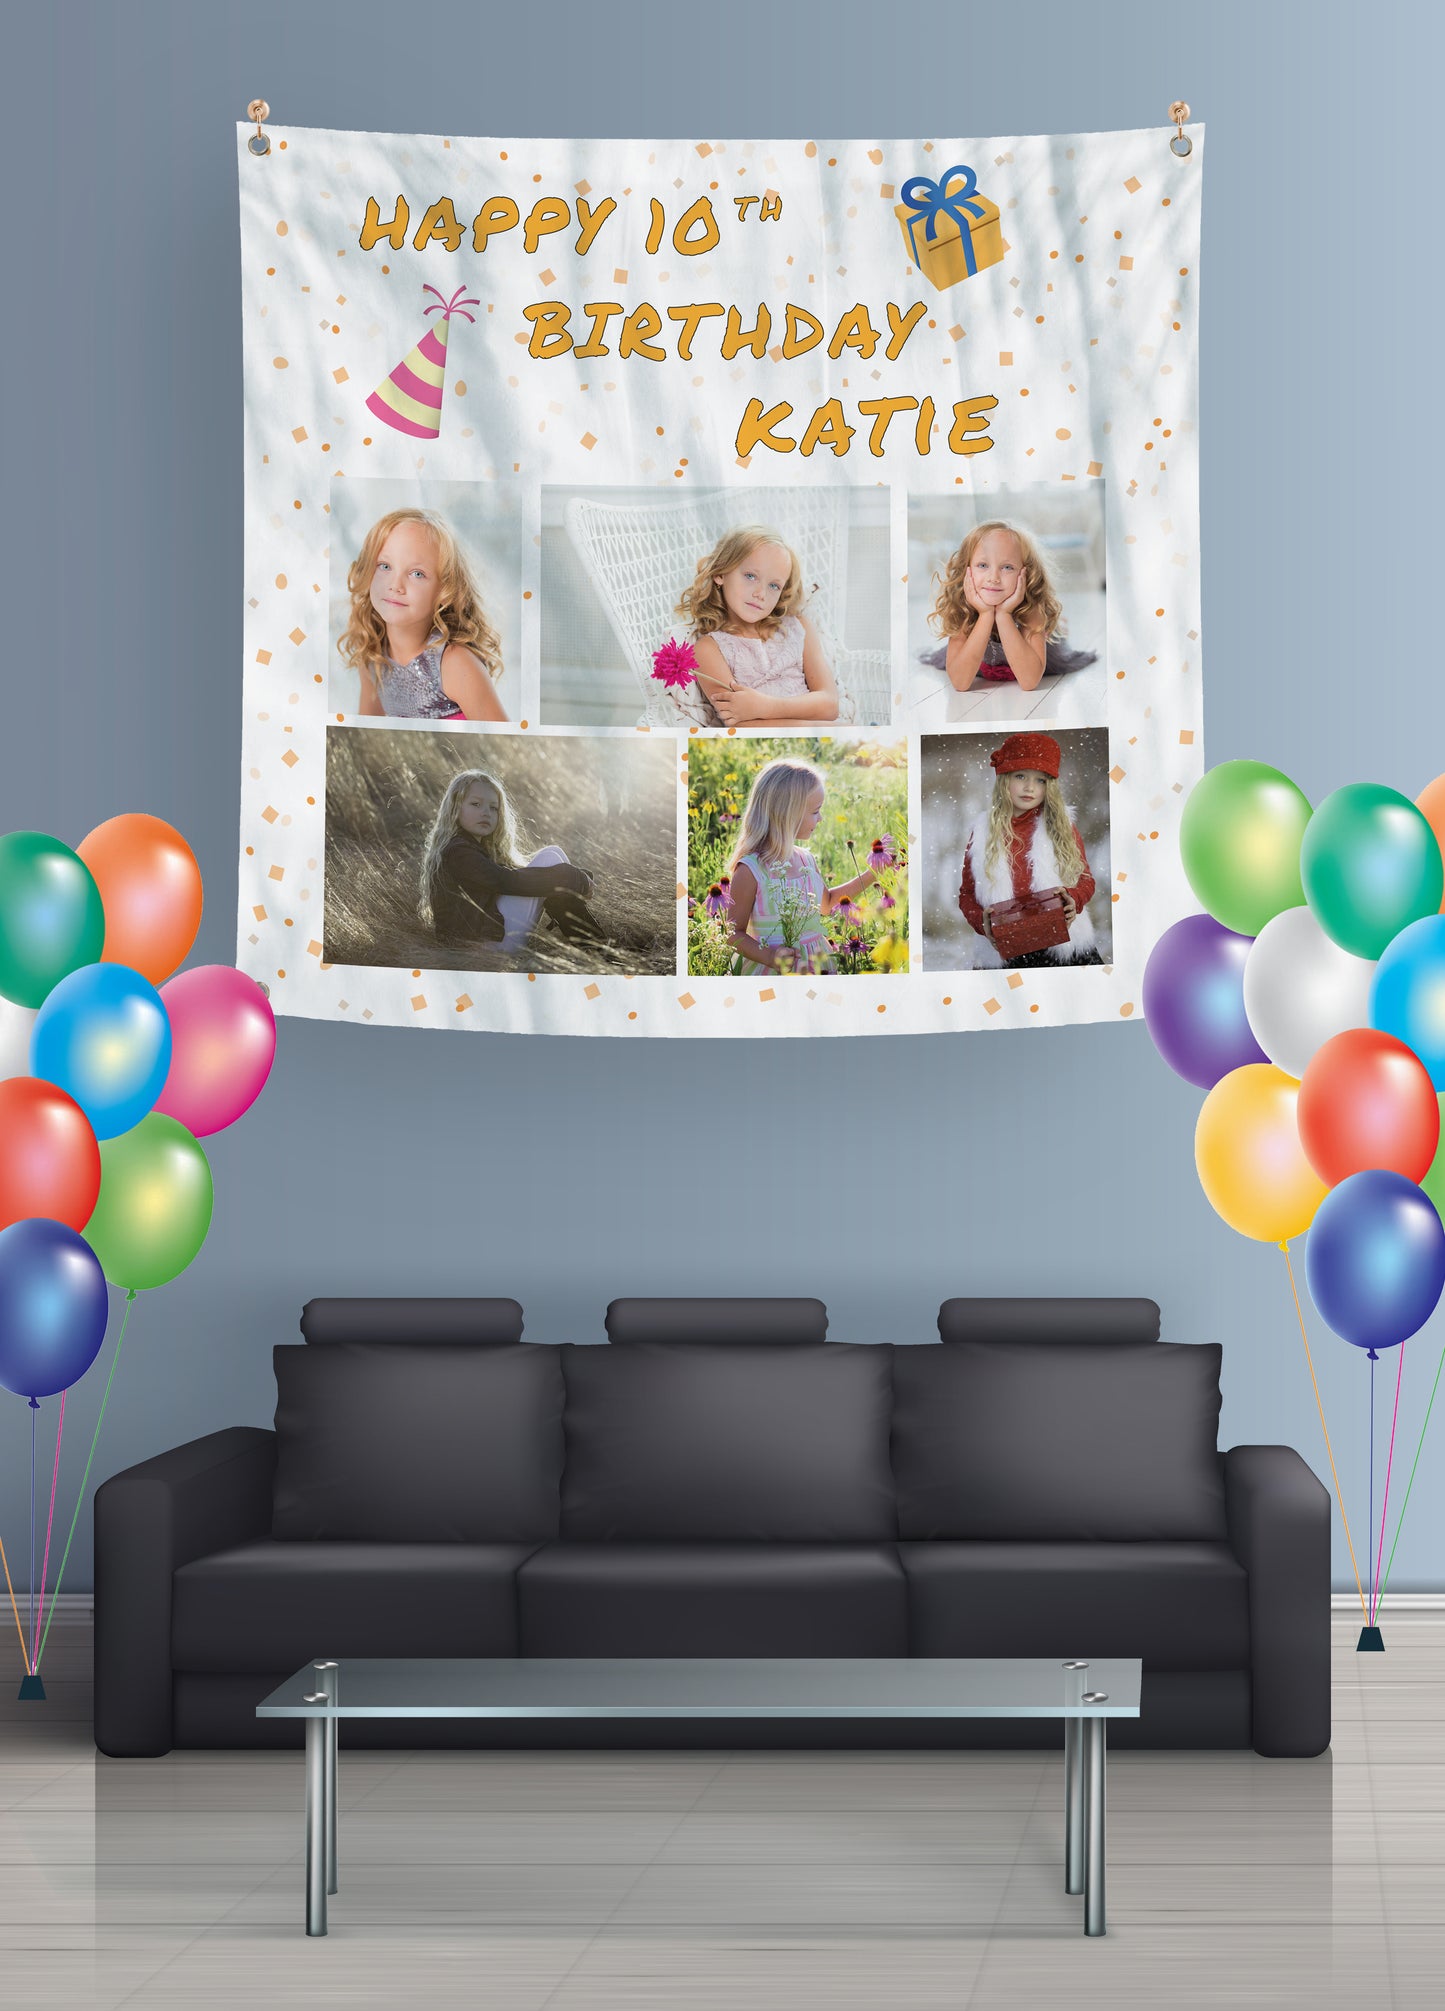 Personalised Birthday Banner in Living Room and Balloons. Happy Birthday. Confetti Background.